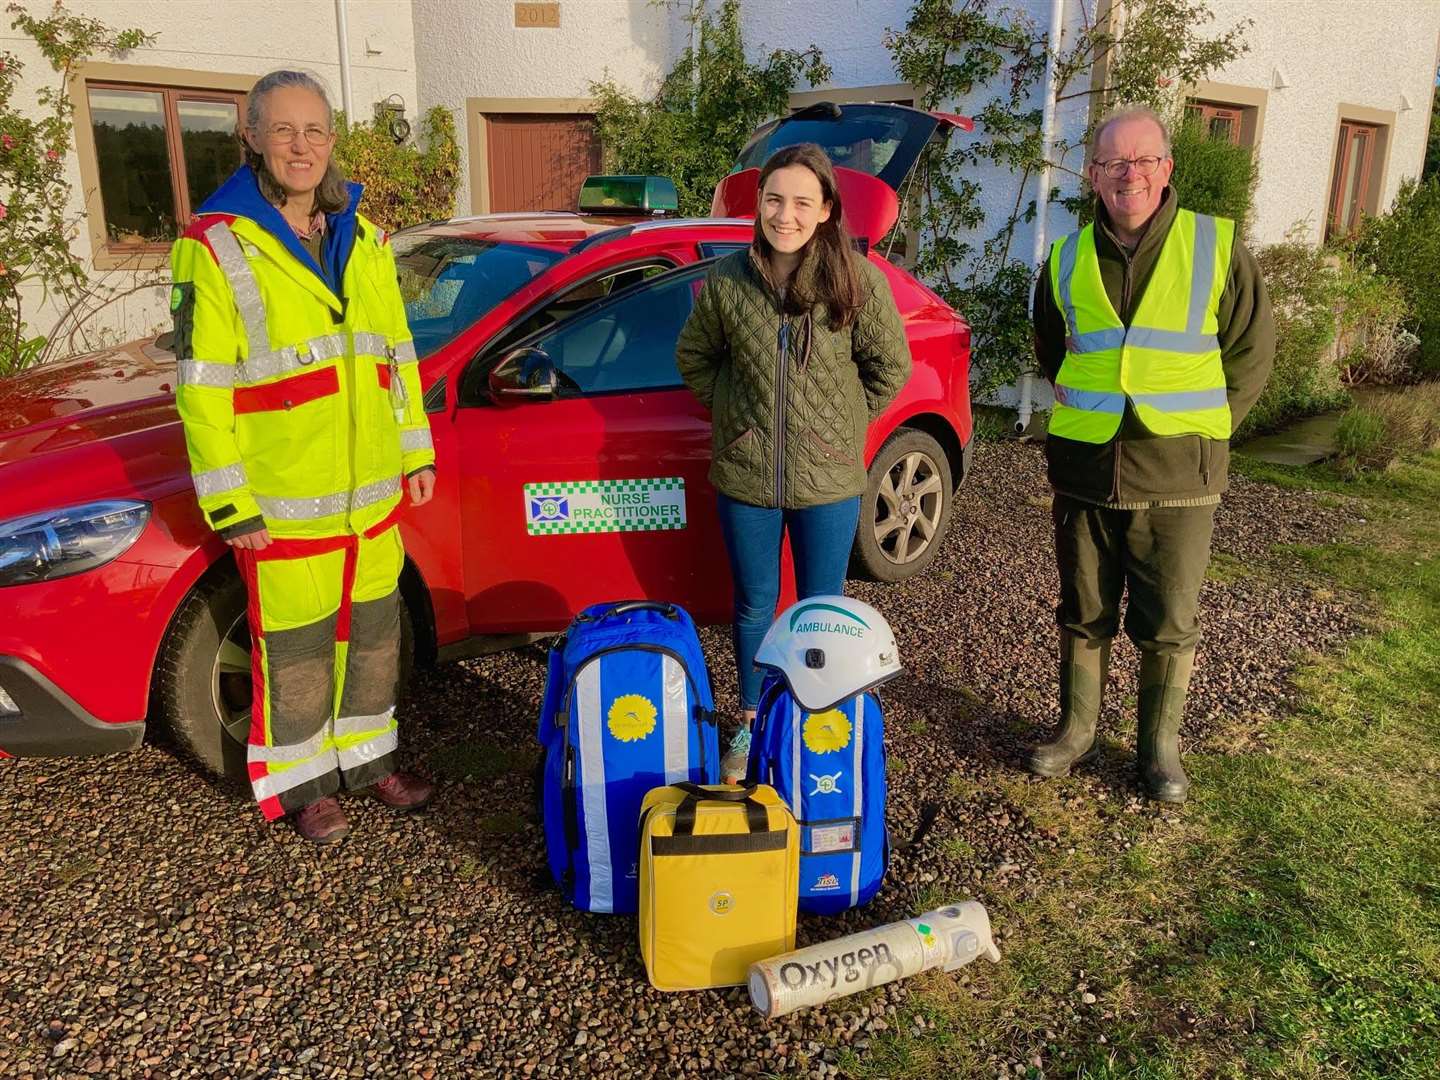 The Marriott family hope to raise £5000 to pay for two of the distinctive blue Sandpiper bags which contain a defibrillator and other equipment.